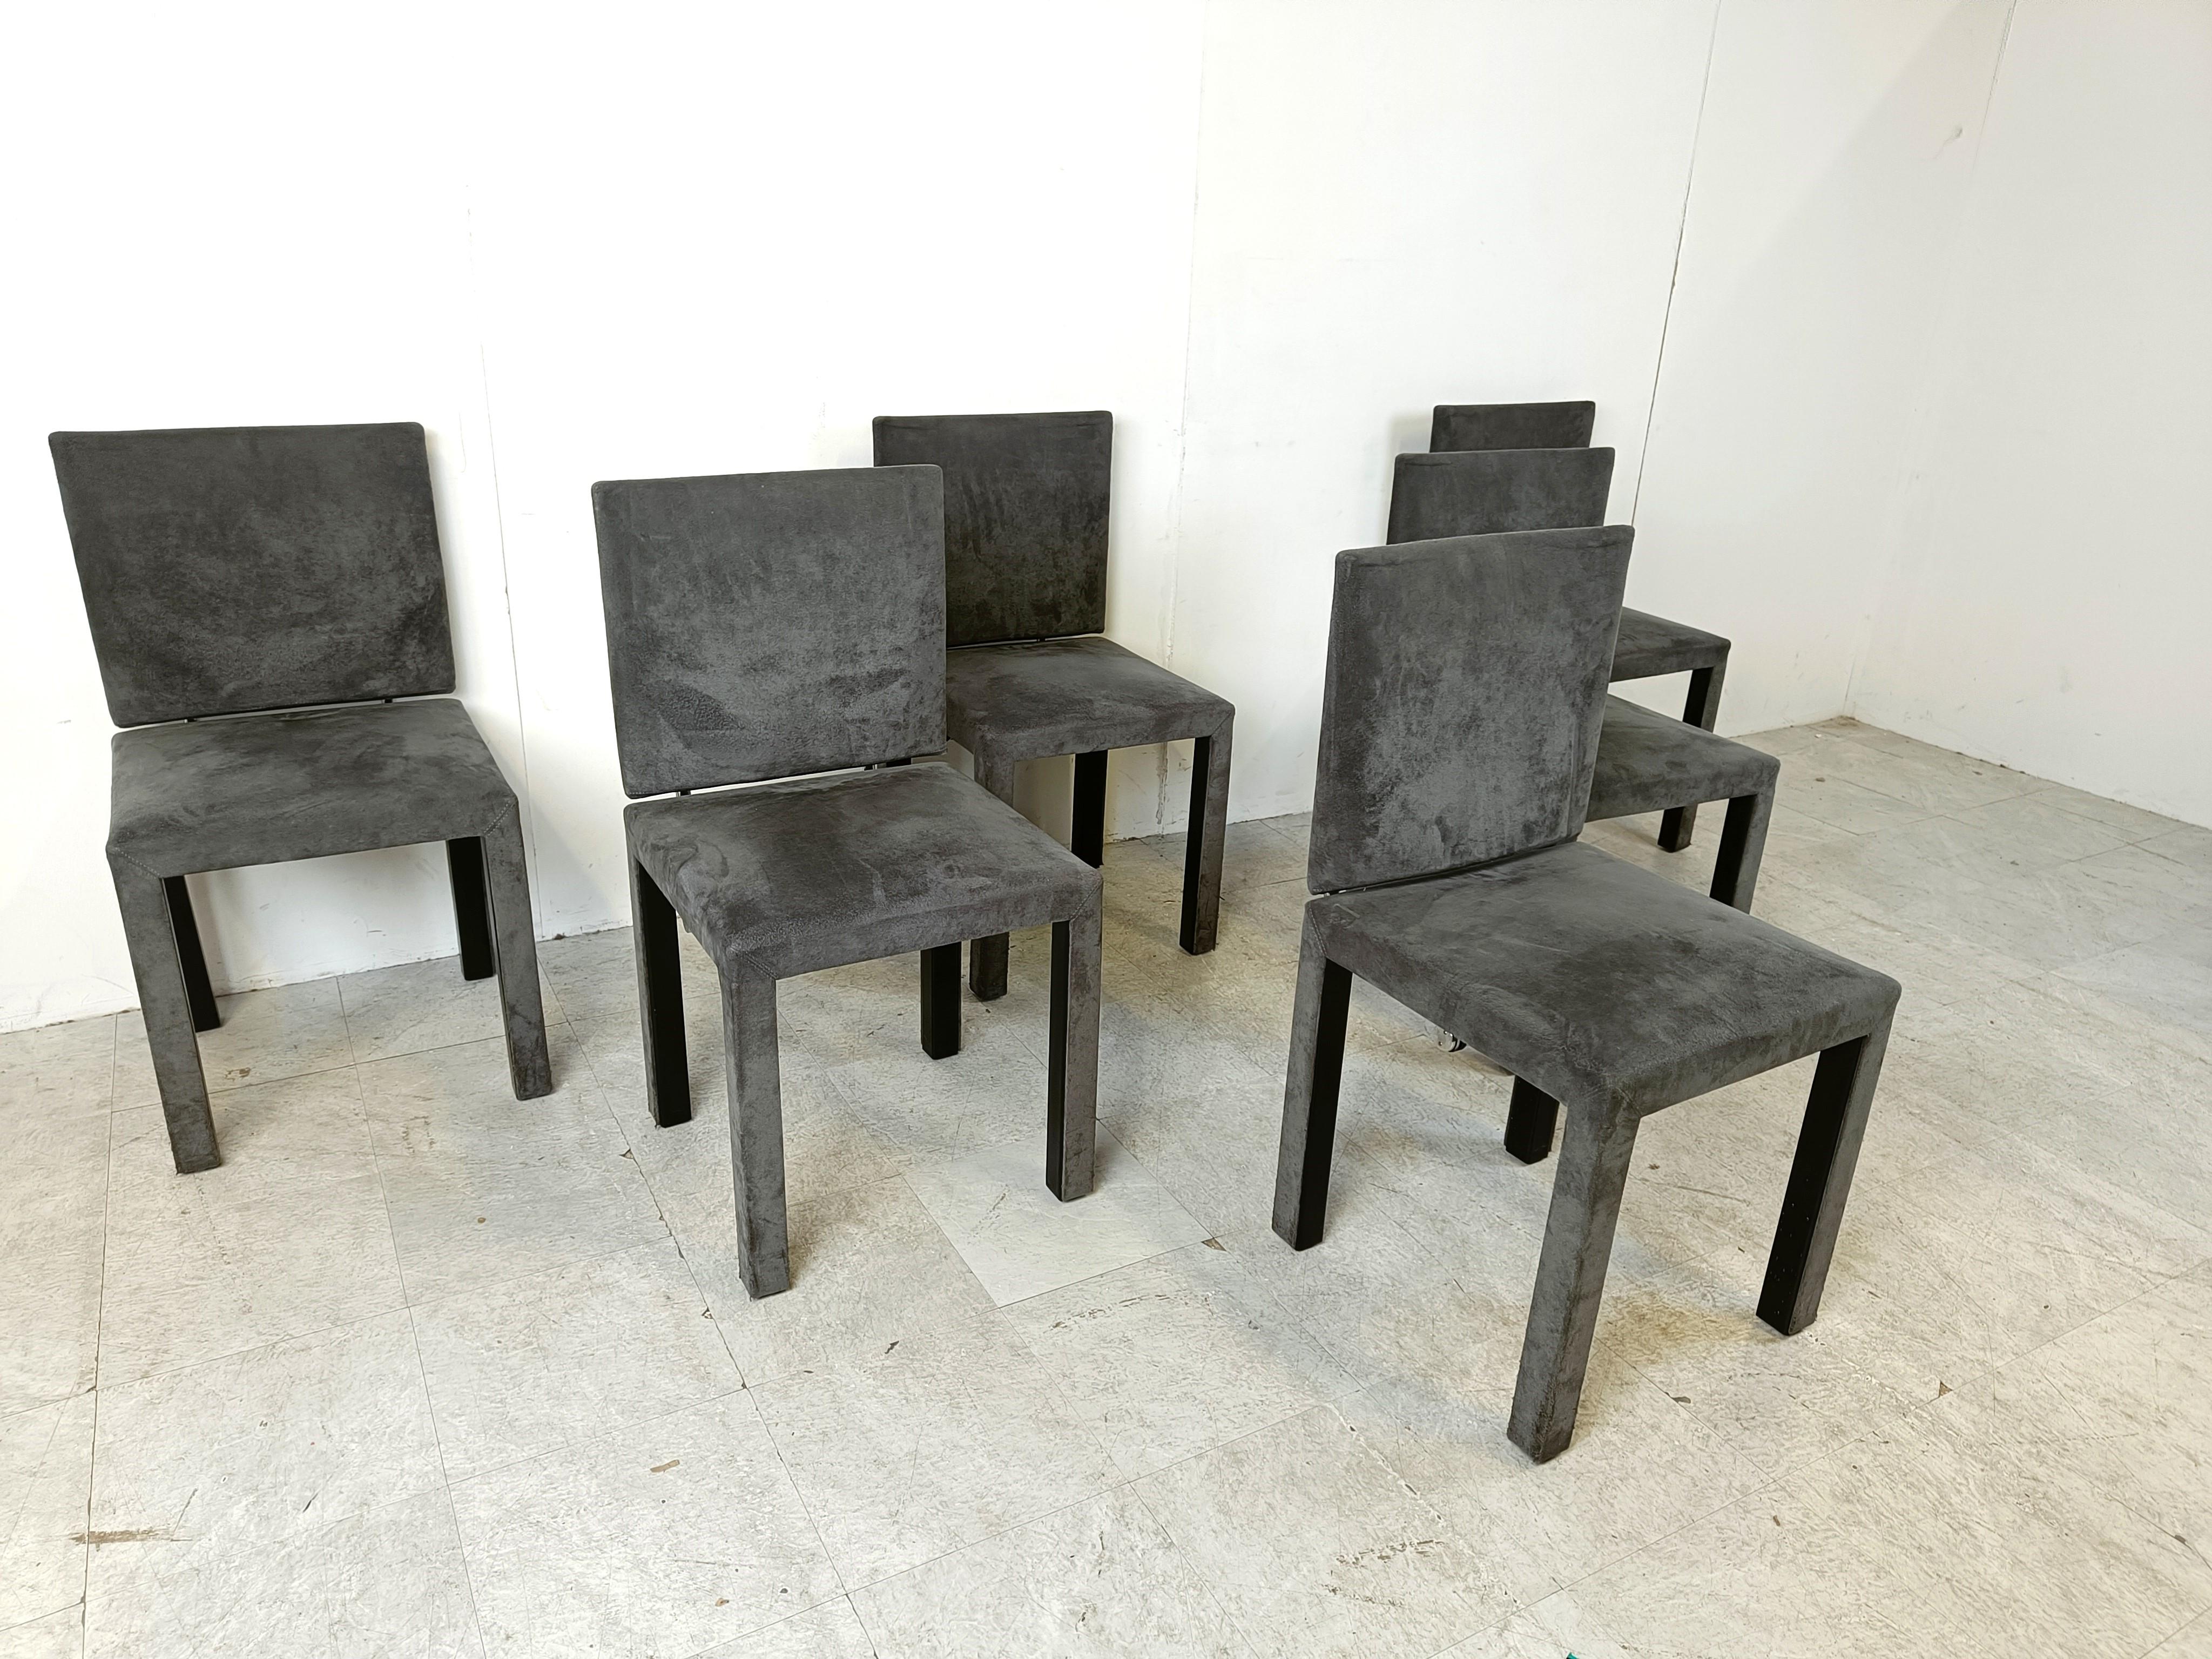 Velvet Arcadia dining chairs by Paolo Piva for B& B Italia set of 6